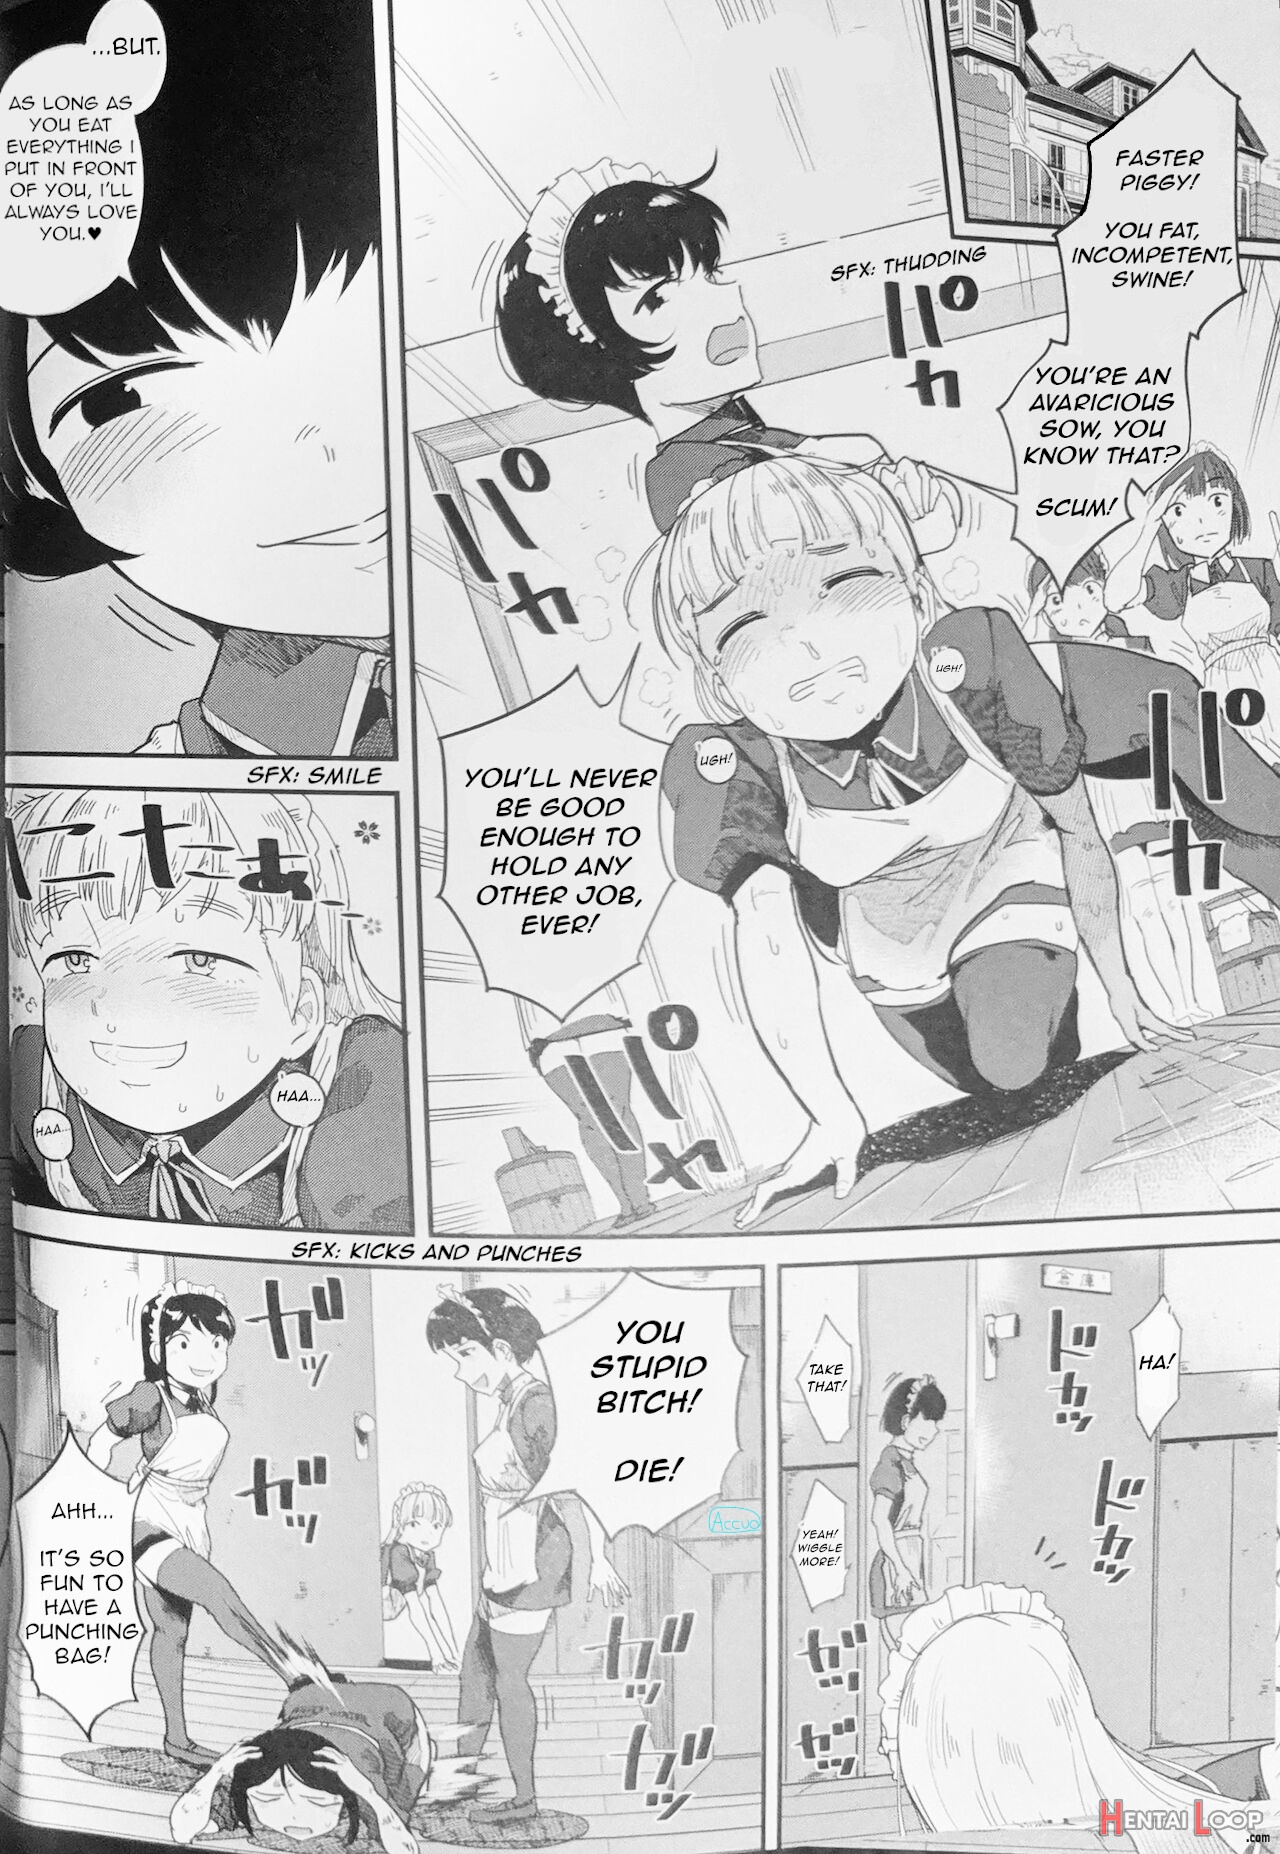 Eating Maid 2 - Lust For Domination page 15